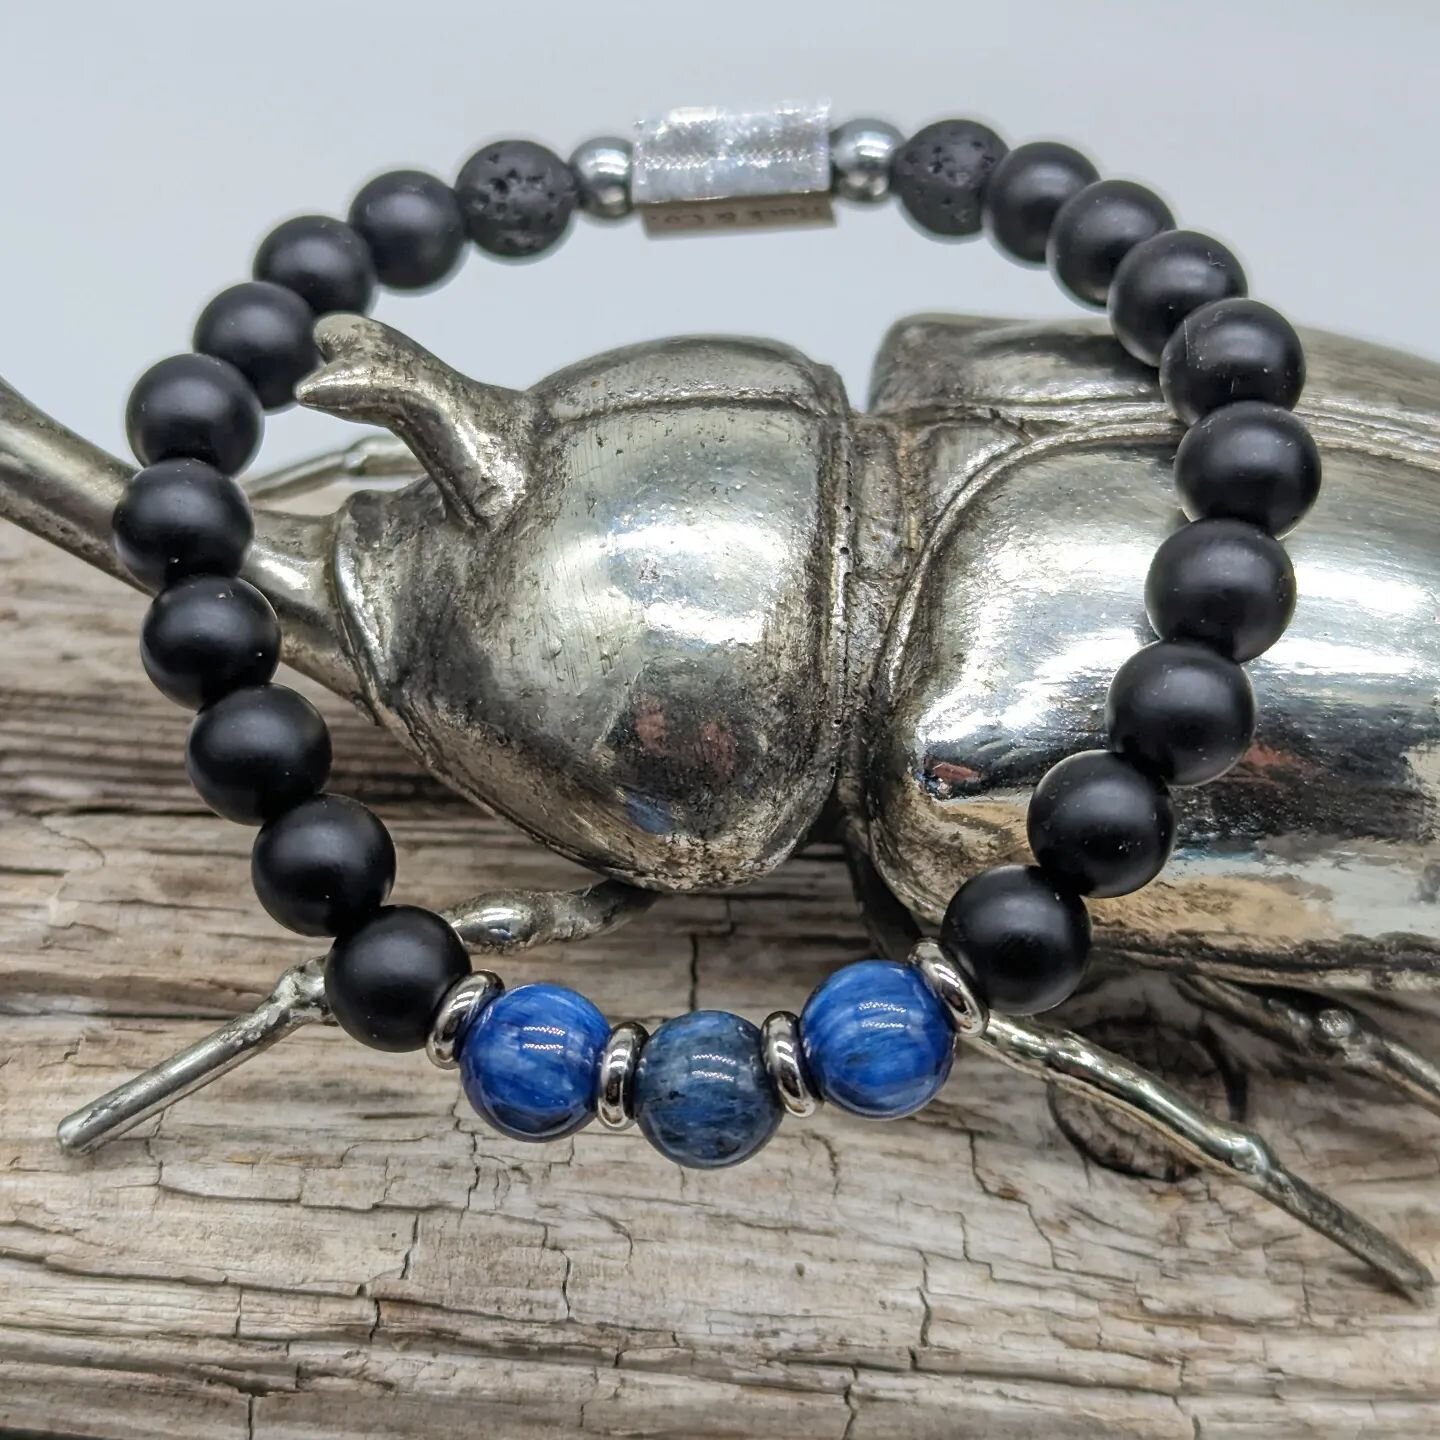 Calling all cars
This black onyx, basalt and kyanite Huck &amp; Co. Intention bracelet is great for encouraging  self-examination, self-awareness and promoting logical thinking. Great for lower back. Promotes vigor, steadfastness and stamina.  Impart